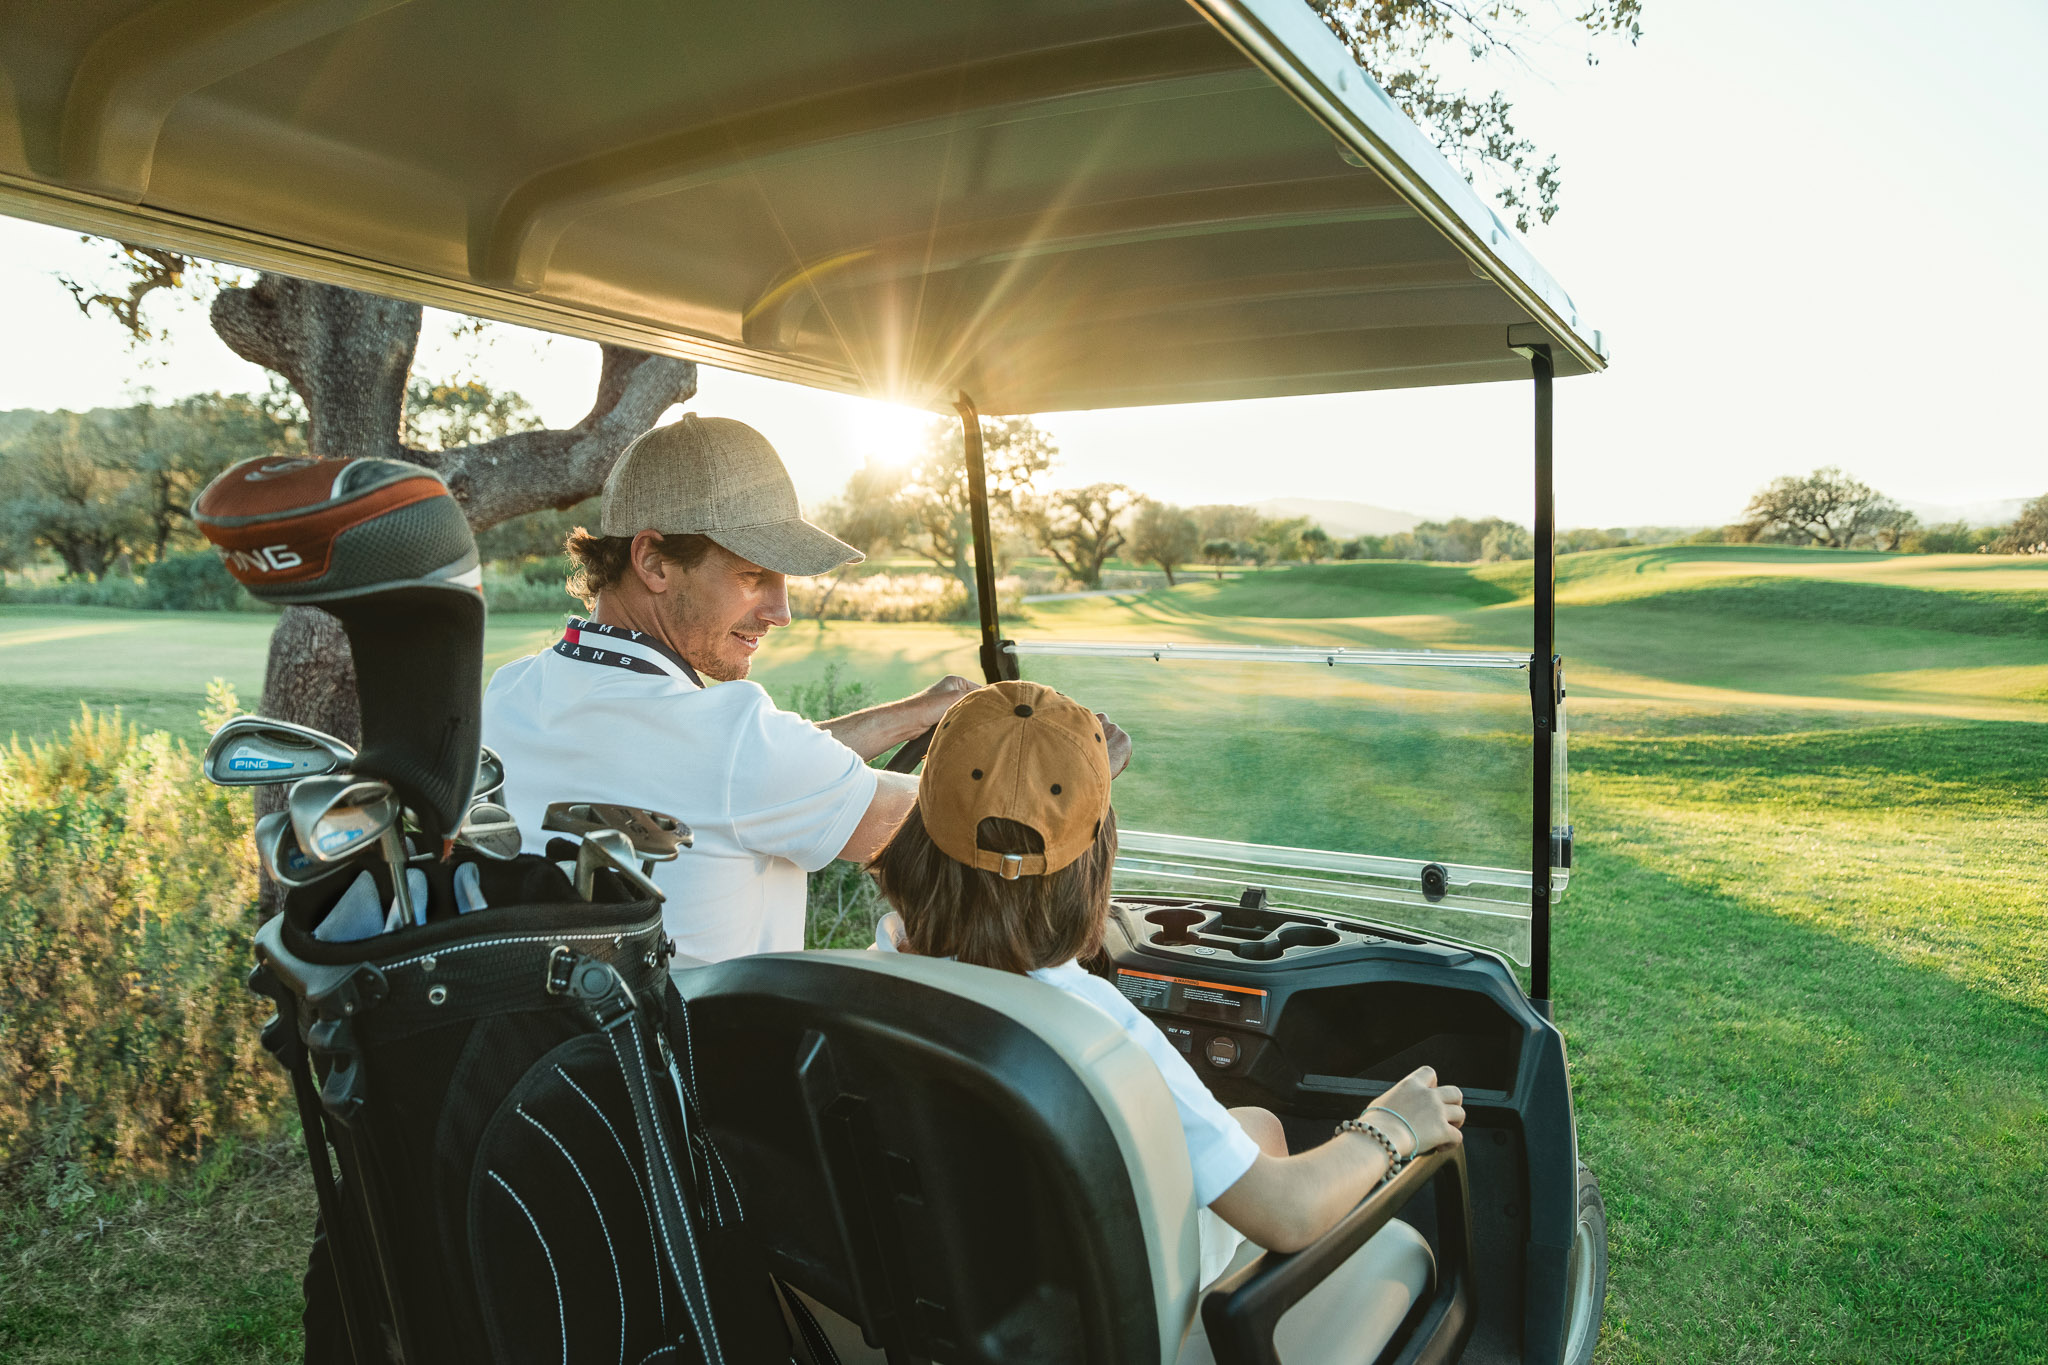 Father and son sat in a golf buggy together on a golf course.